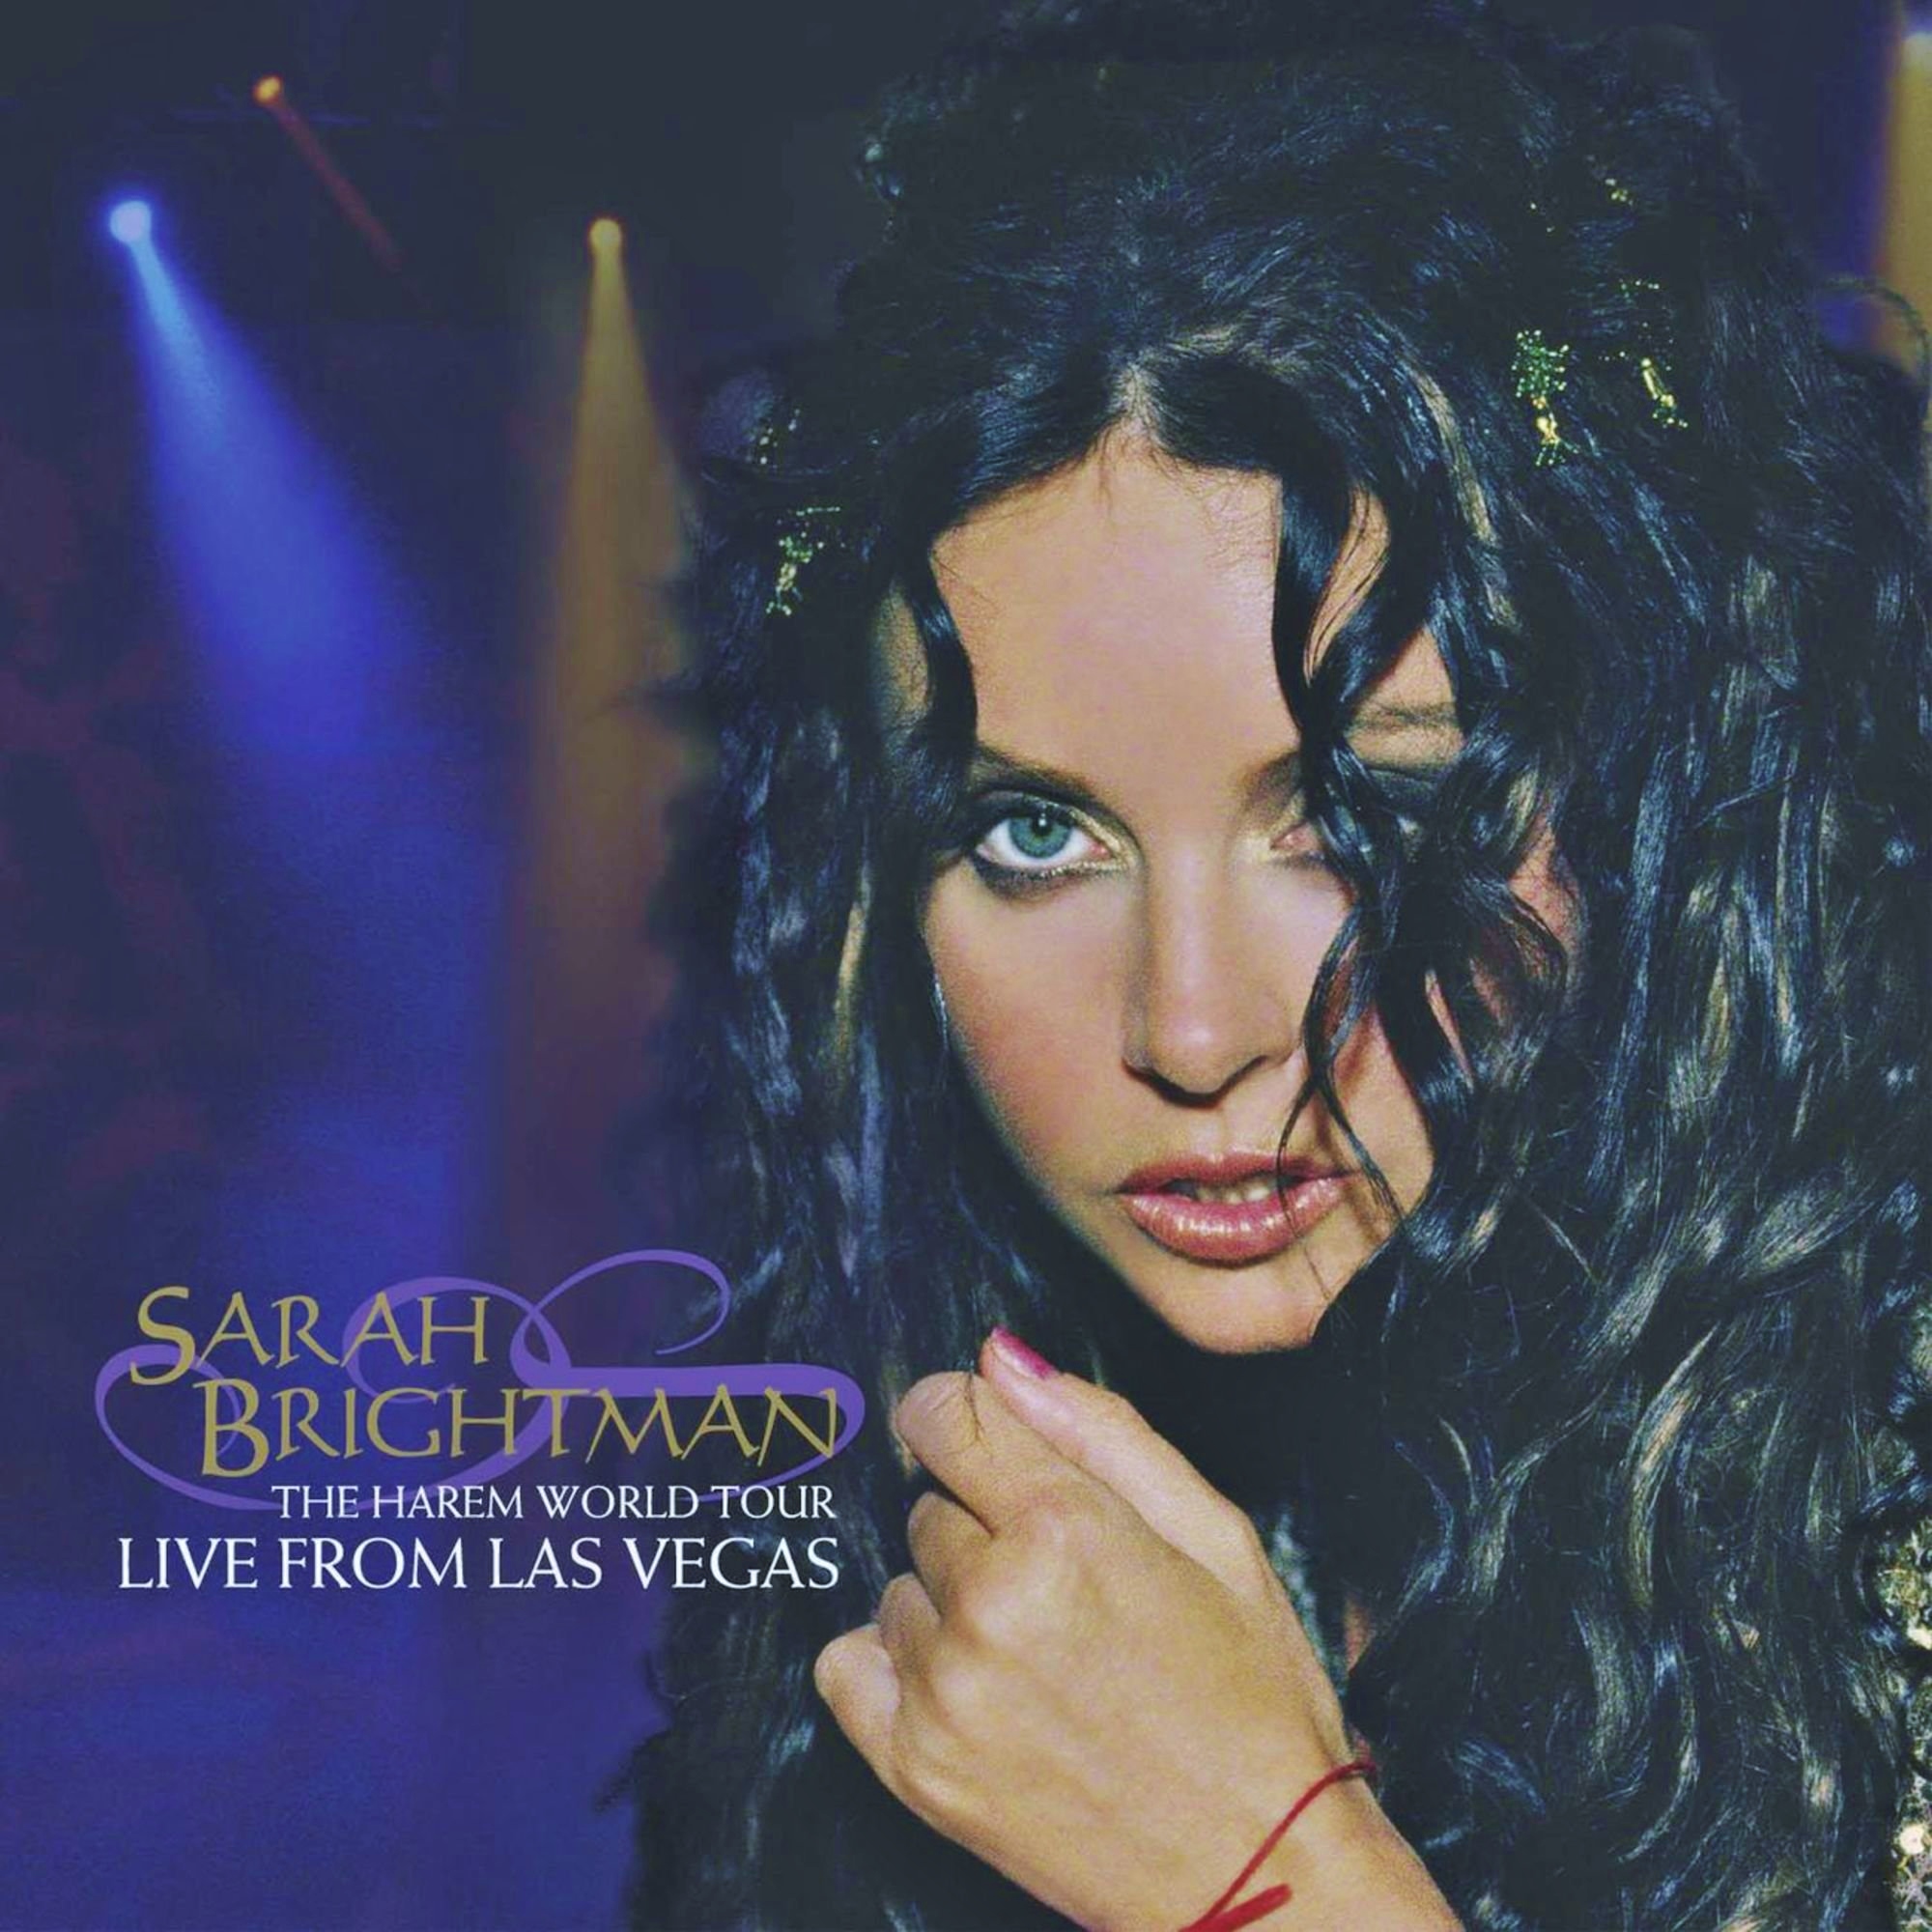 Release “The Harem World Tour: Live from Las Vegas” by Sarah Brightman ...